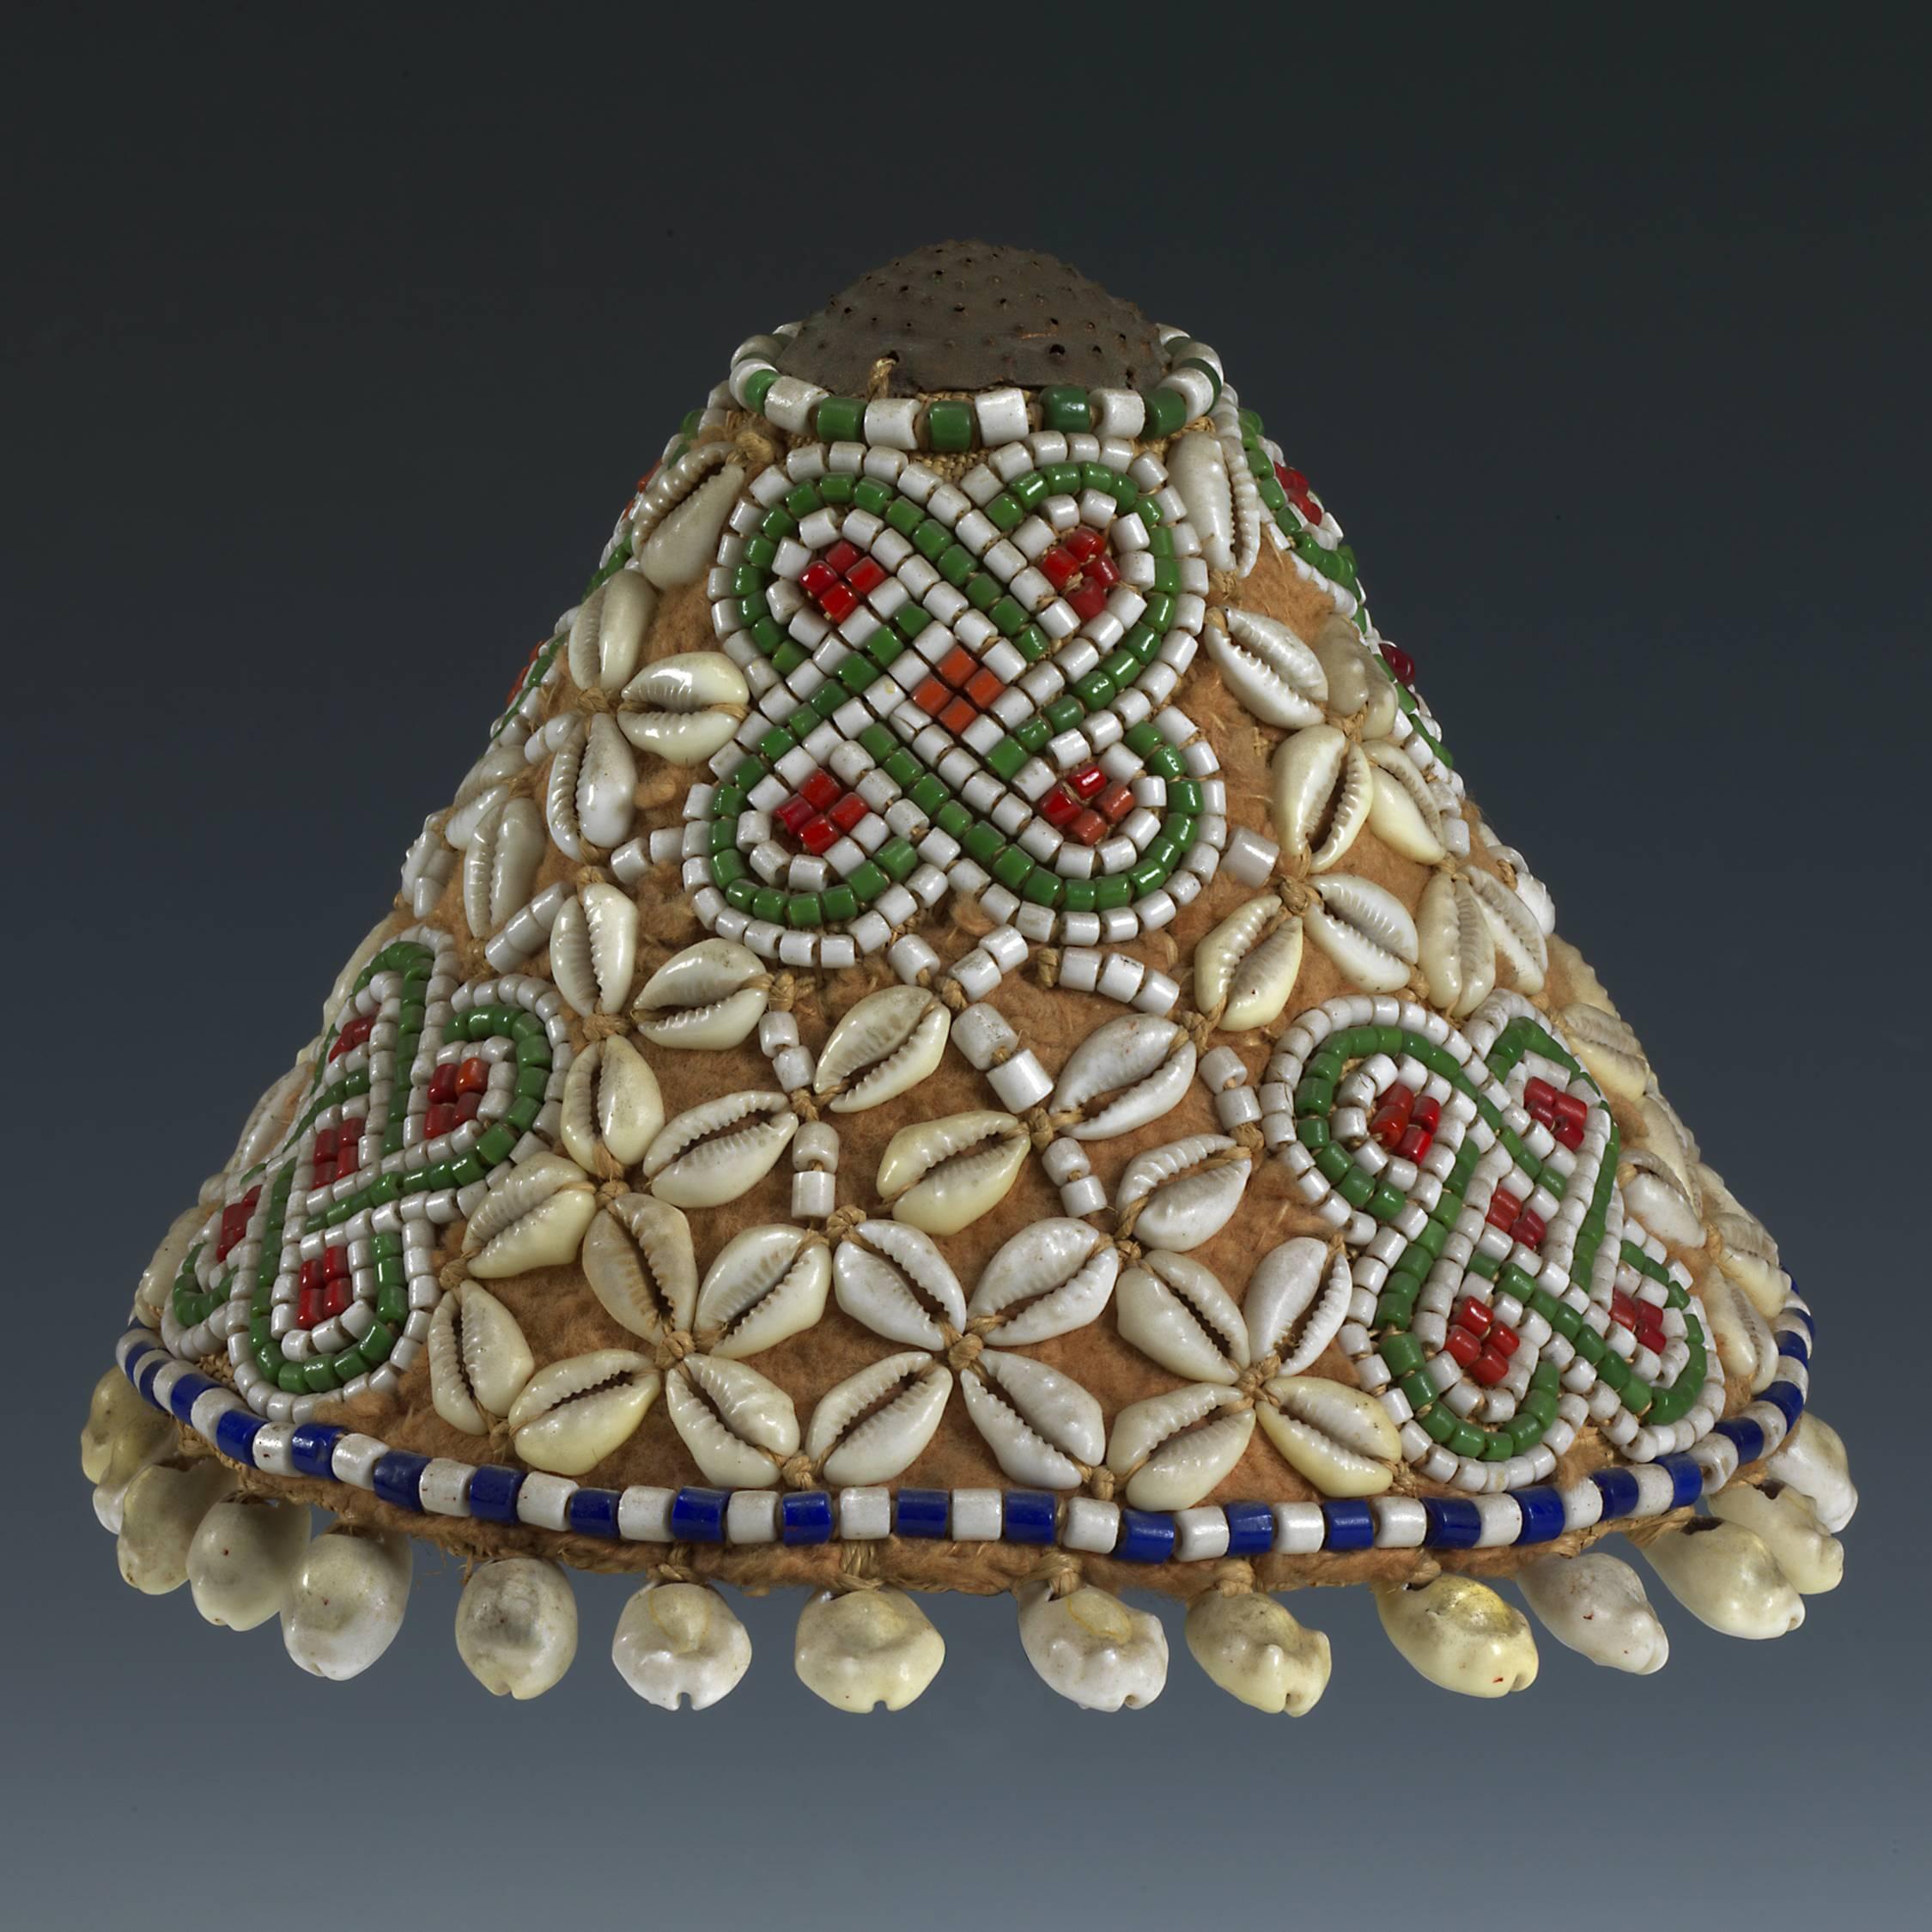 Offered by Andres Moraga
ceremonial hat.
Made for the Bushoong ruling elite of the Kuba Kingdom in D.R.Congo.
Over a base of raffia, decorated with glass beads, copper, cowrie shells and barkcloth. The blue, white, green and red trade beads date